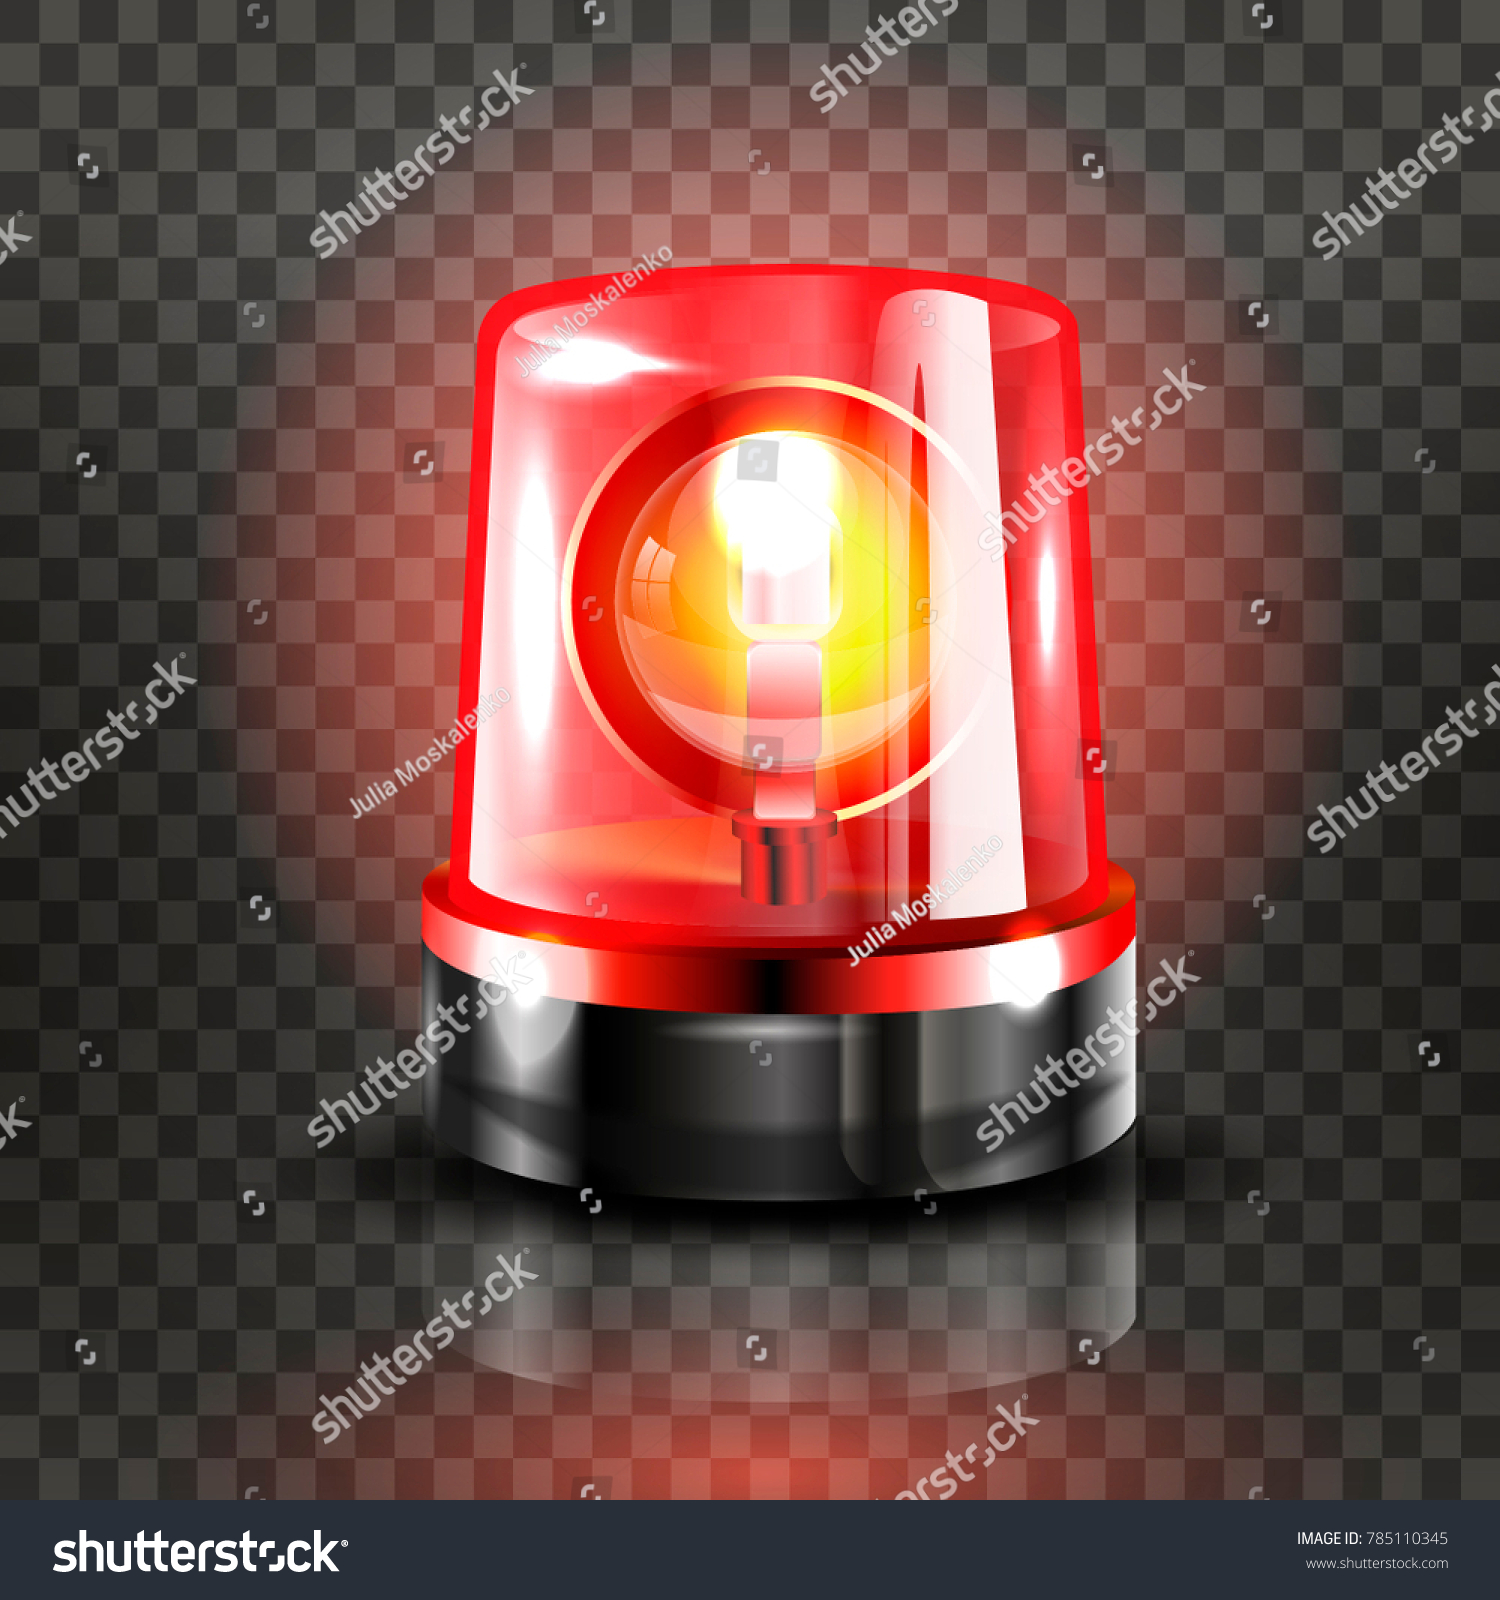 SVG of Red Flasher Siren Vector. Realistic Object. Light Effect. Beacon For Police Cars Ambulance, Fire Trucks. Emergency Flashing Siren. Transparent Background vector Illustration svg